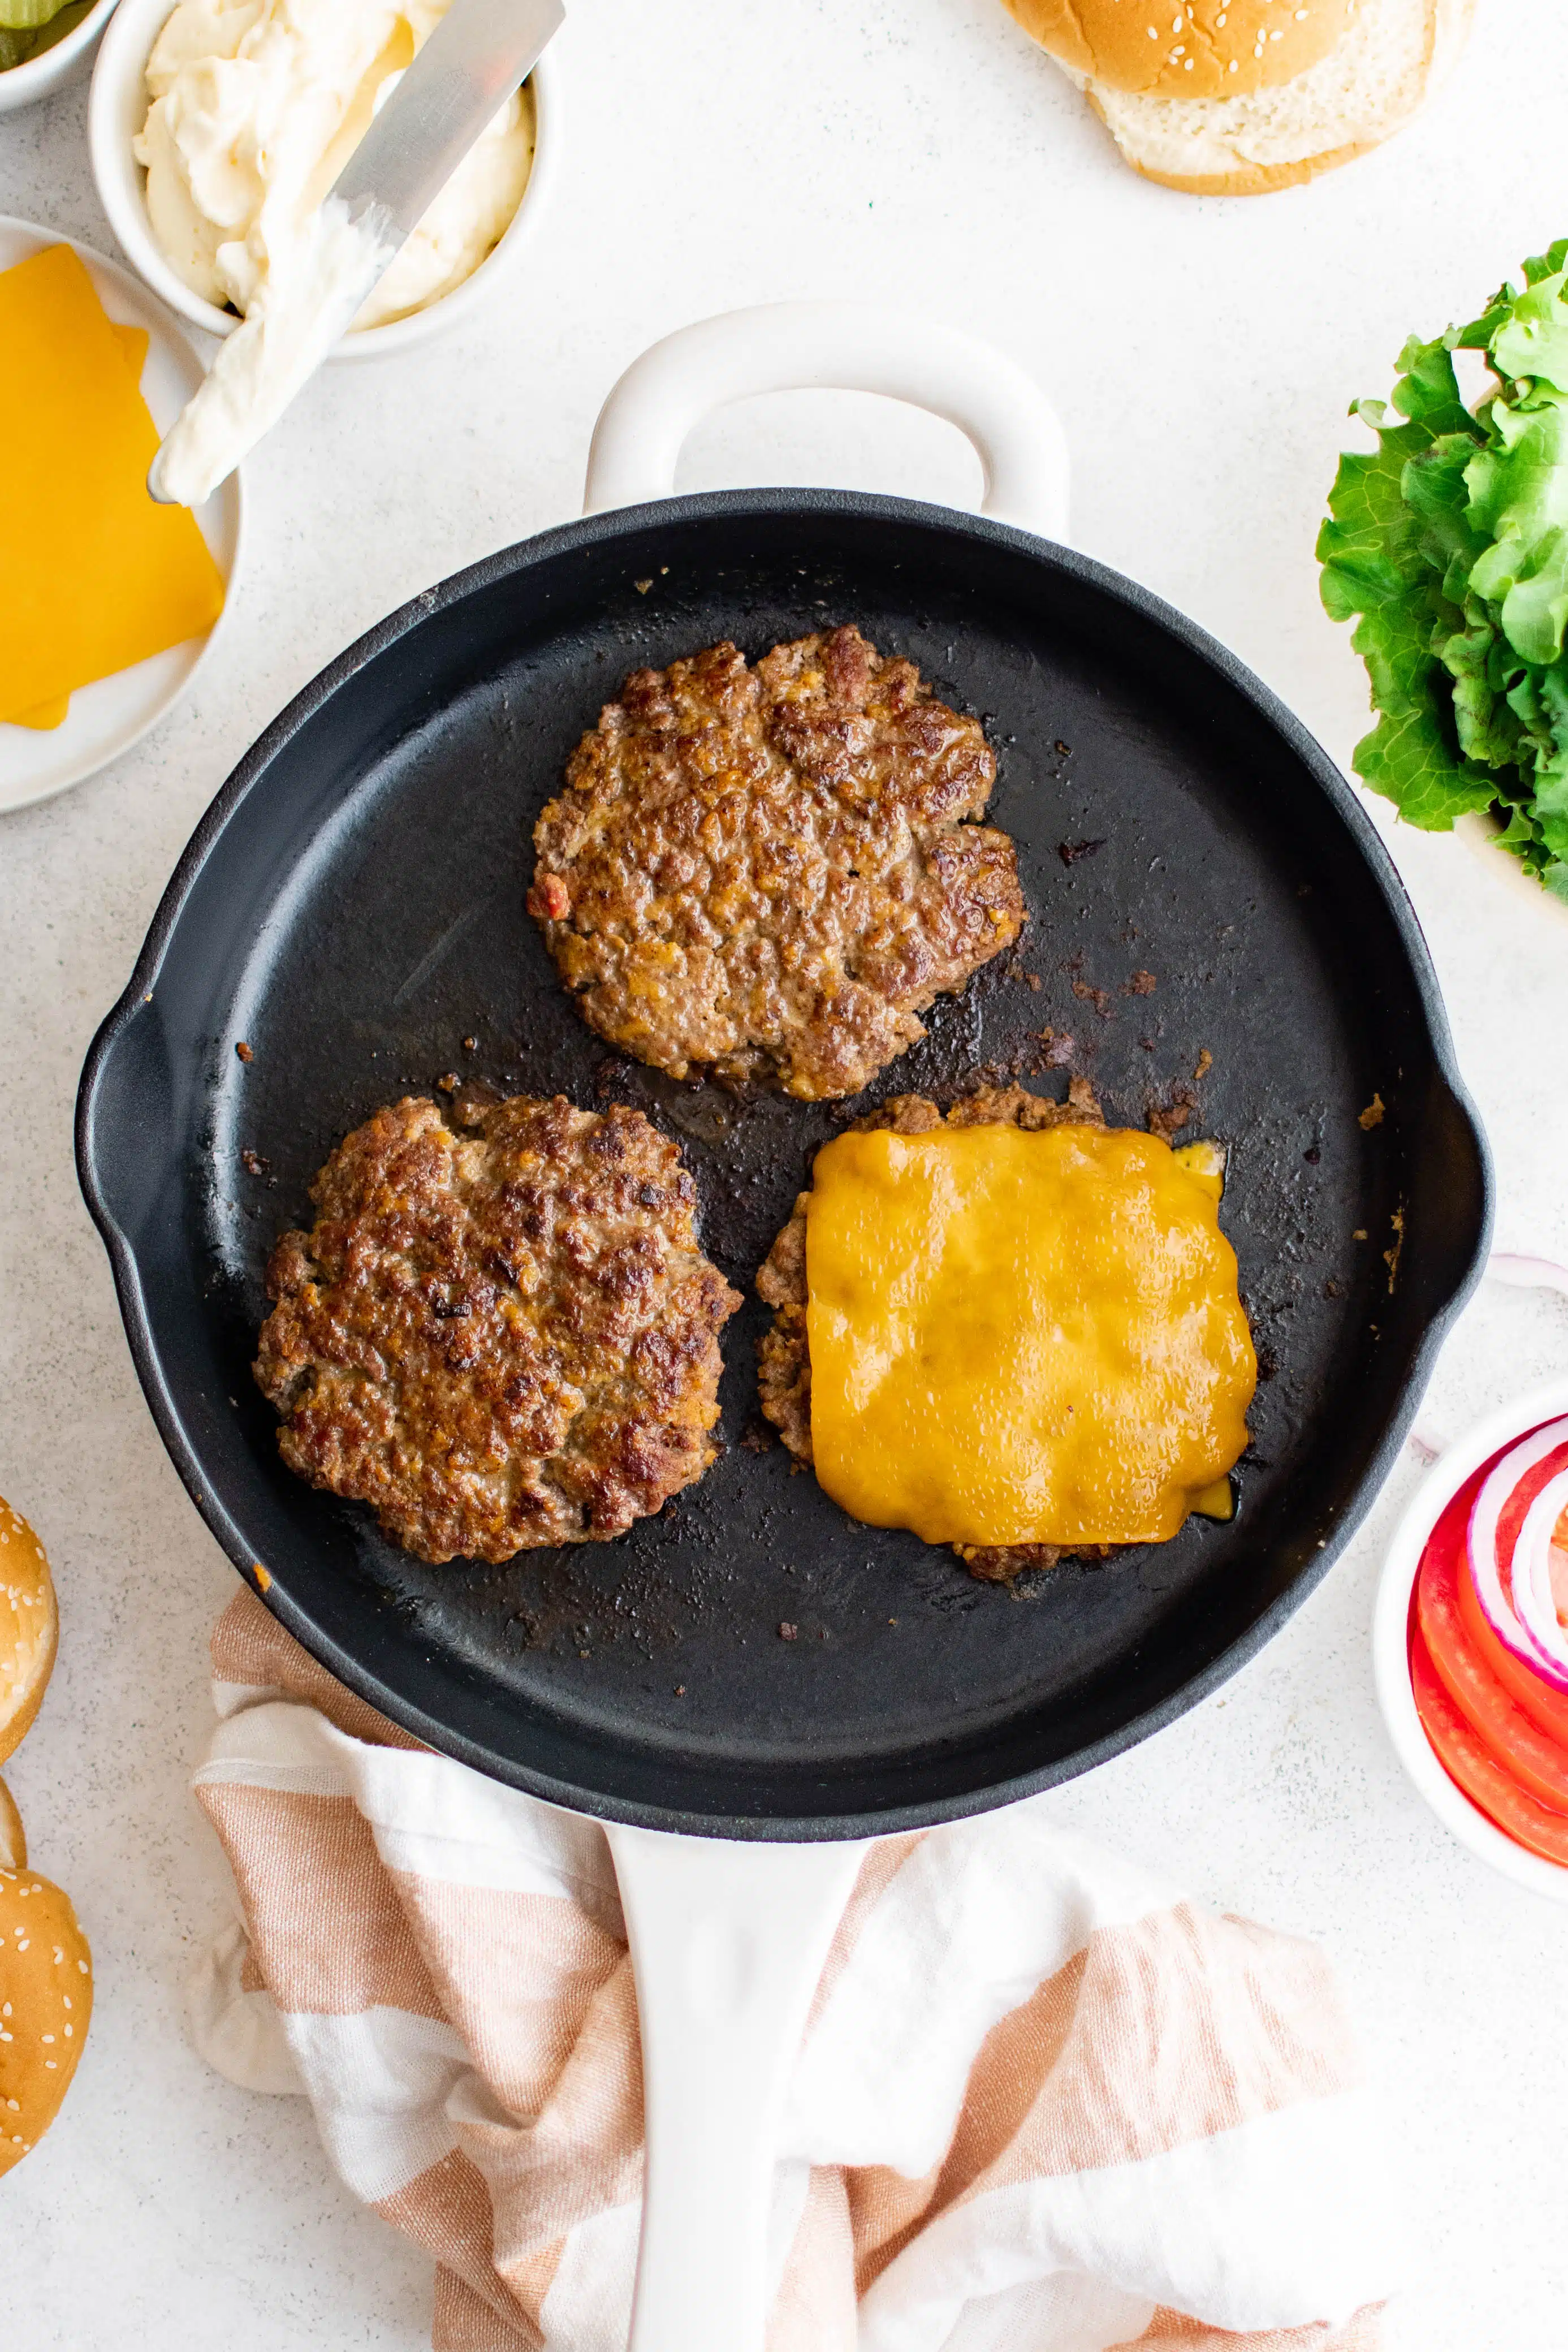 Three hamburger patties (one with cheese) cooking in a large cast iron pan.